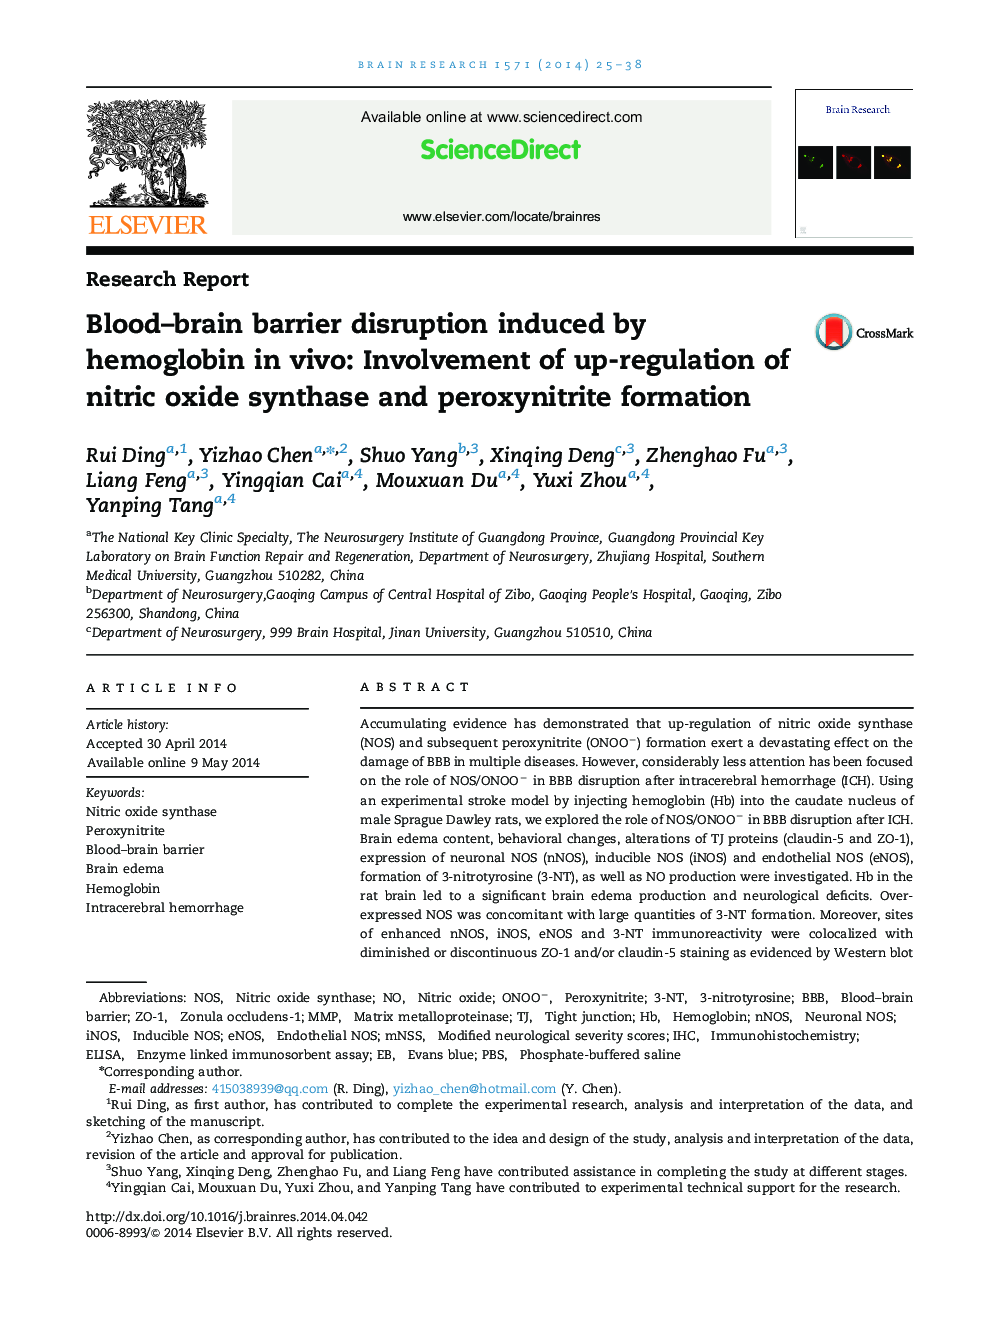 Blood–brain barrier disruption induced by hemoglobin in vivo: Involvement of up-regulation of nitric oxide synthase and peroxynitrite formation